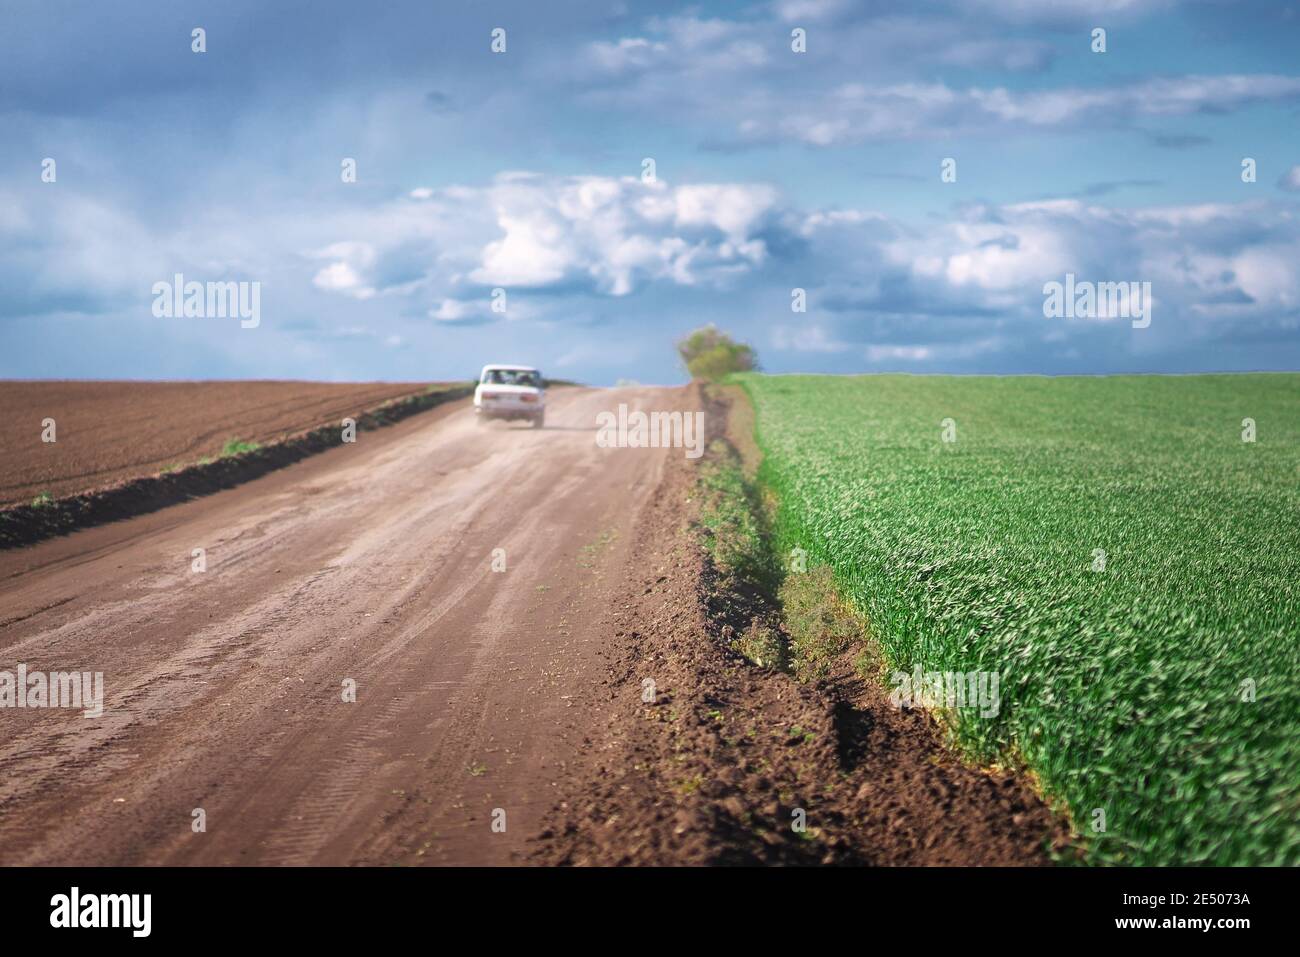 Car on country road landscape and beautiful clouds Stock Photo